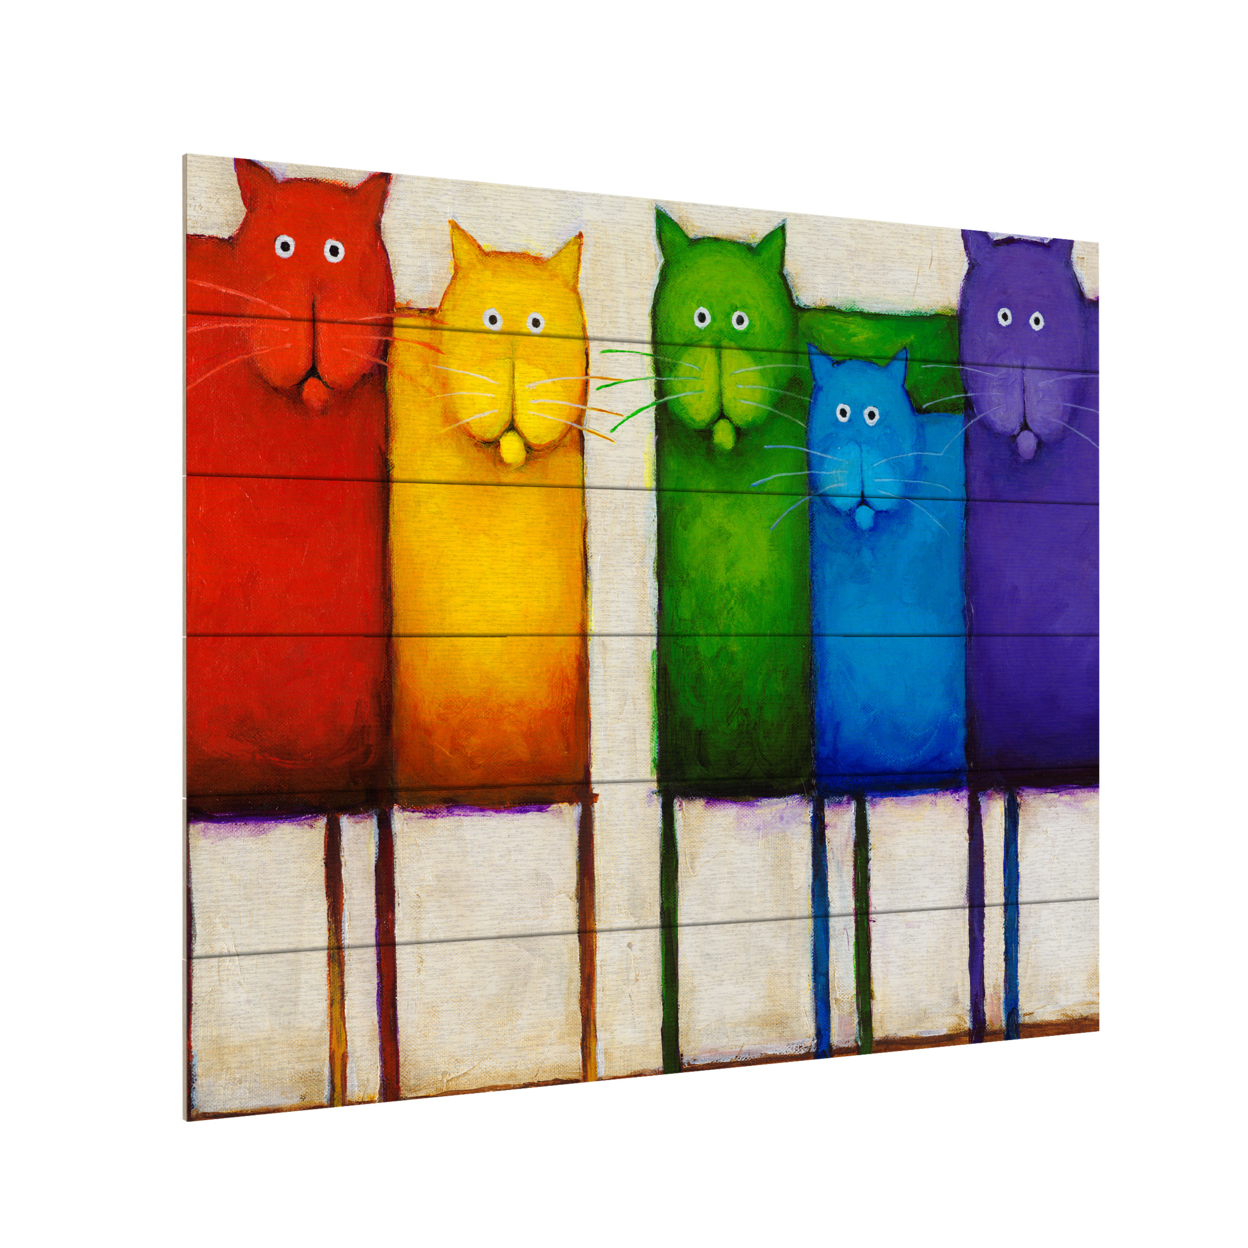 Wooden Slat Art 18 X 22 Inches Titled Rainbow Cats Ready To Hang Home Decor Picture